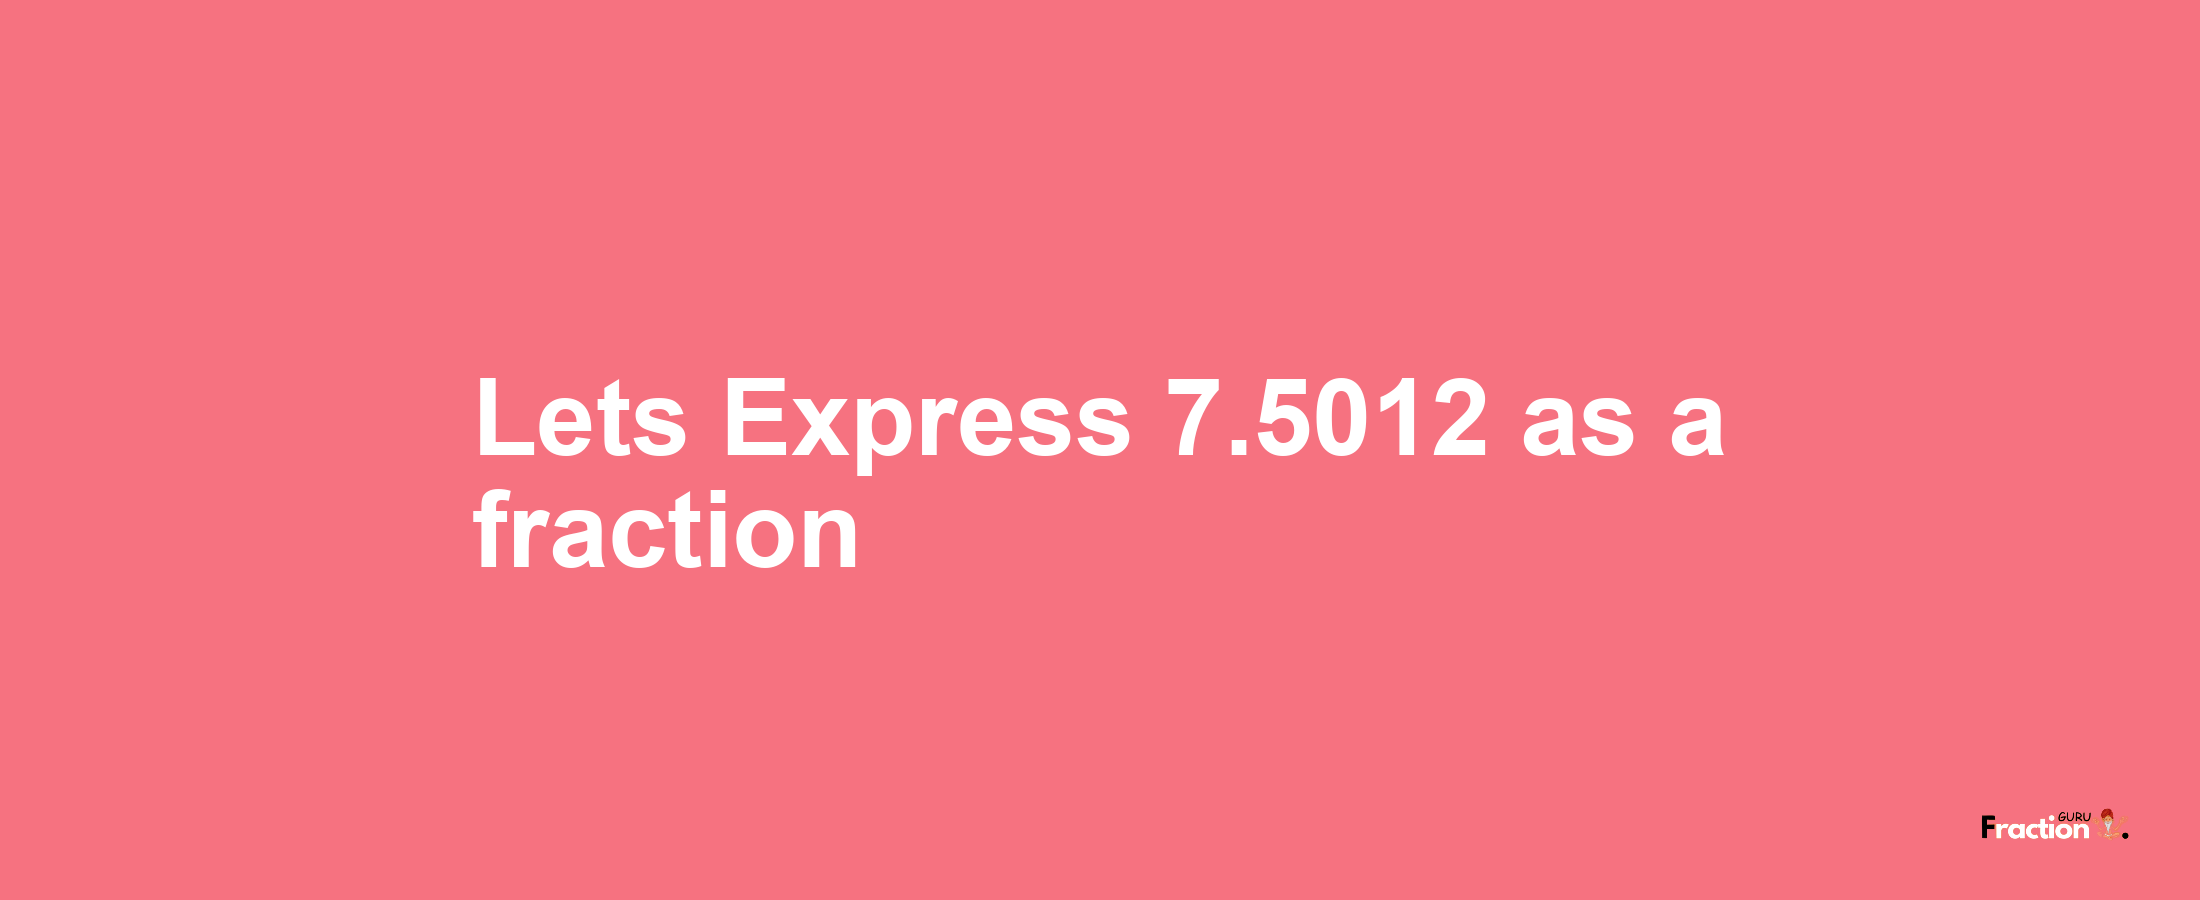 Lets Express 7.5012 as afraction